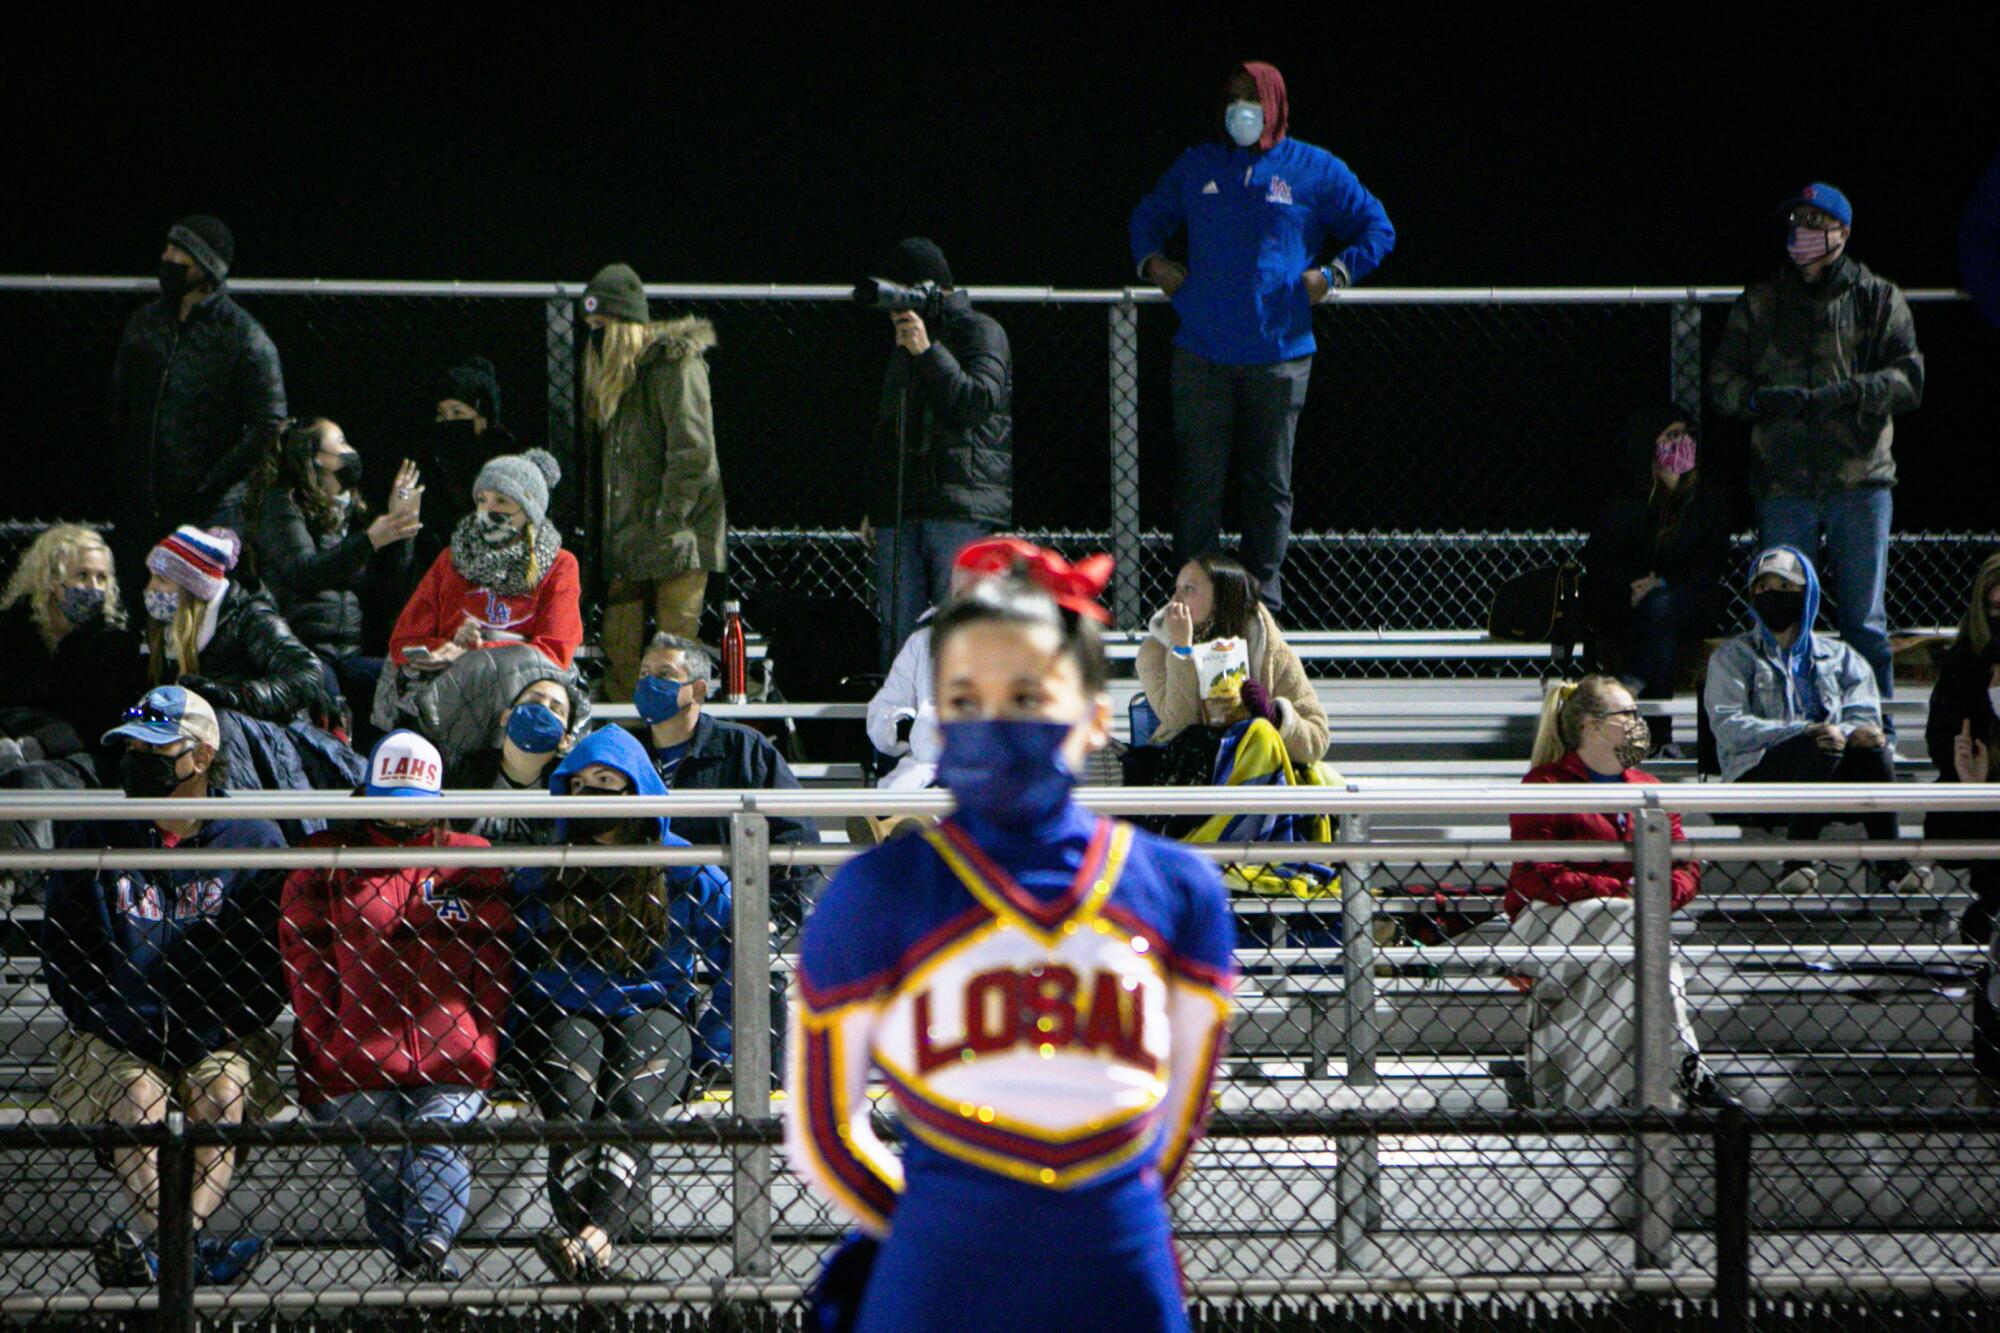  Fans in the stands watch Los Alamitos play their first game of the season.